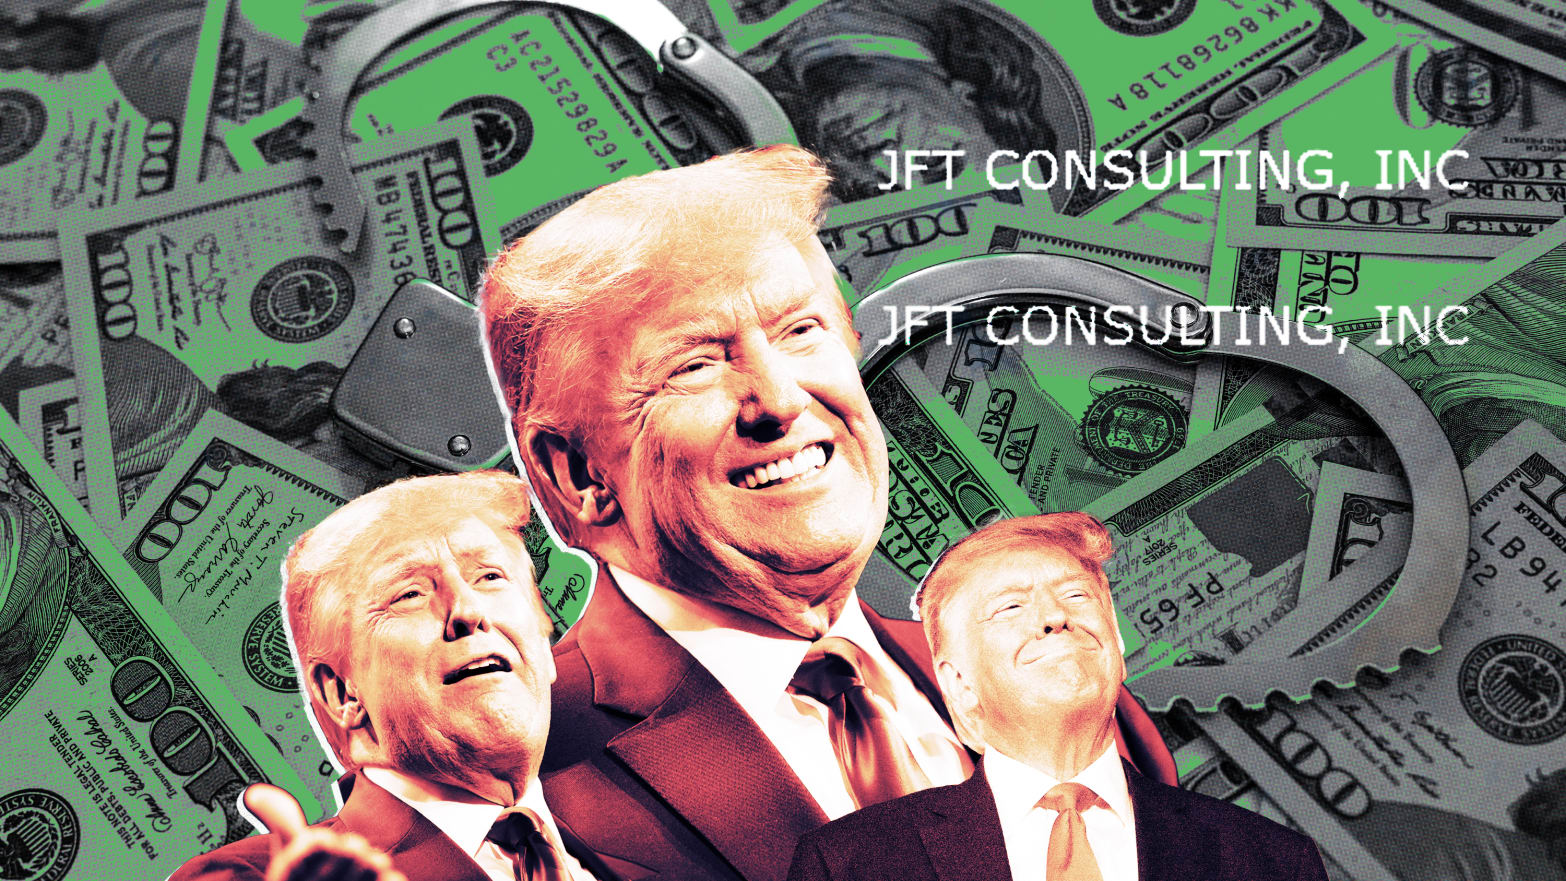 A photo composite of pictures of former President Donald Trump on a background of money and handcuffs.